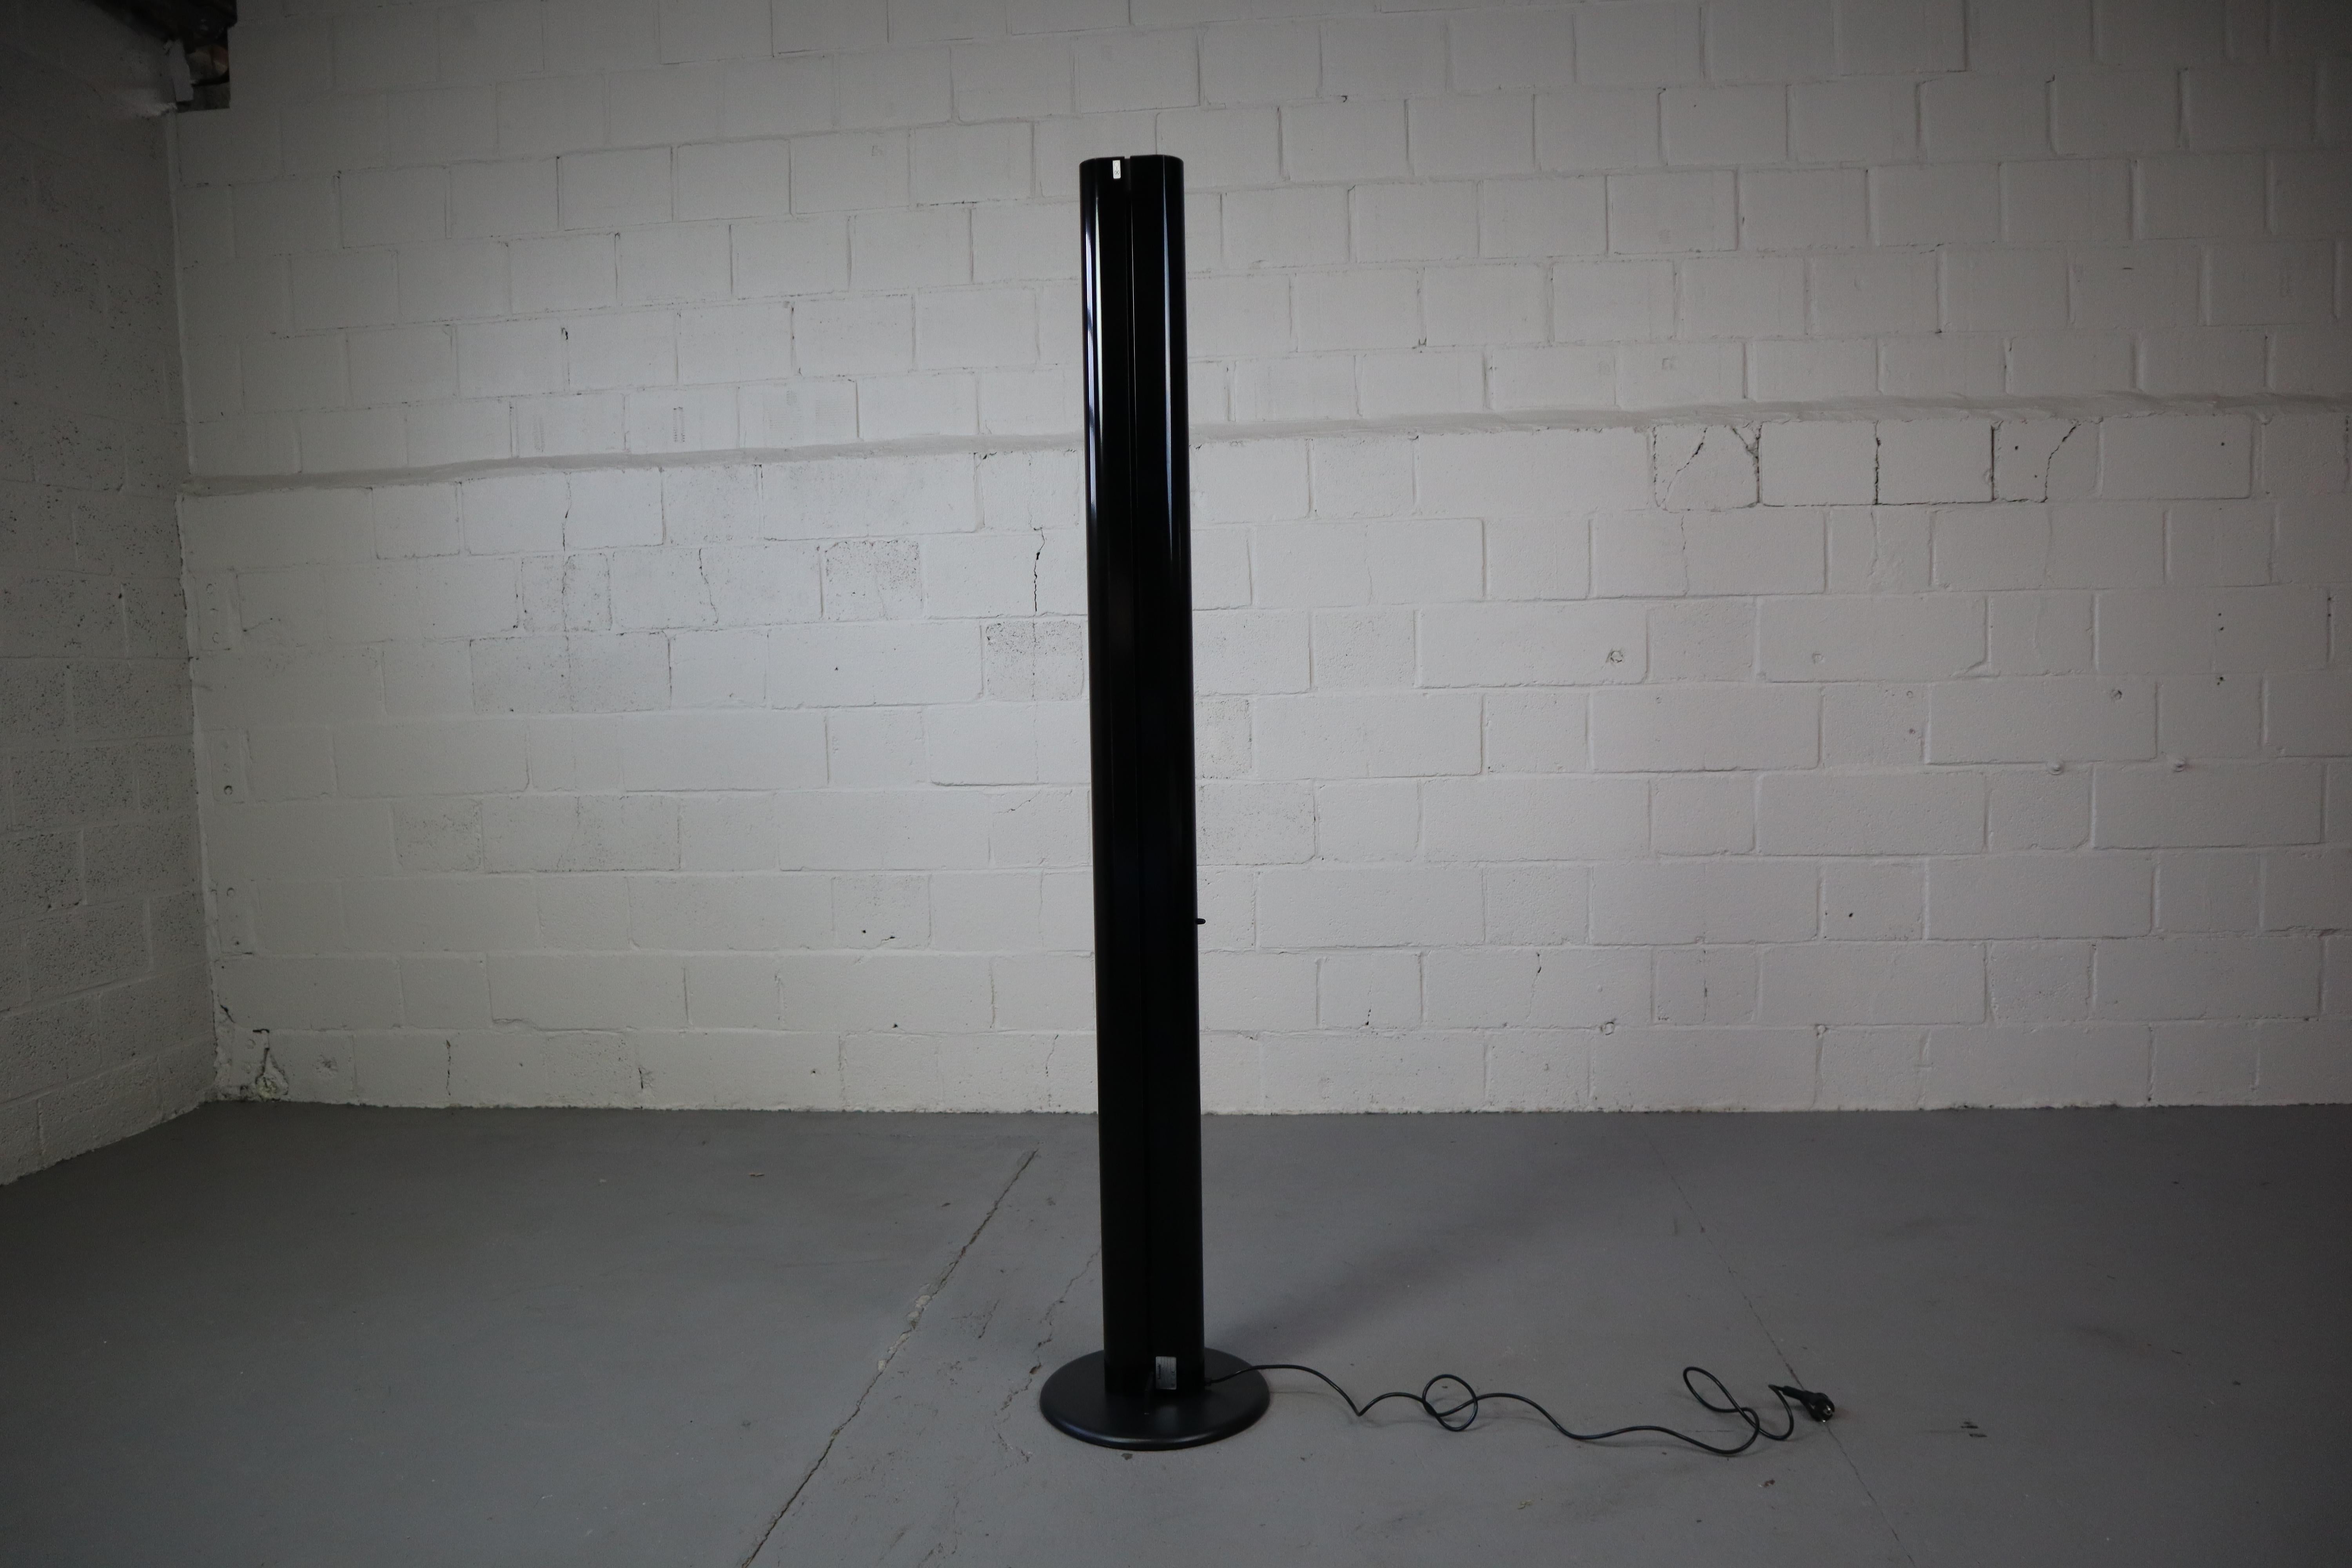 Black Megaron floorlamp by Gianfranco Frattini for Artemide, Italy 1979
Timeless and simple design featuring two section body in extruded aluminum with high gloss lacquer finish with incorporated slide dimmer provides indirect halogen lighting.